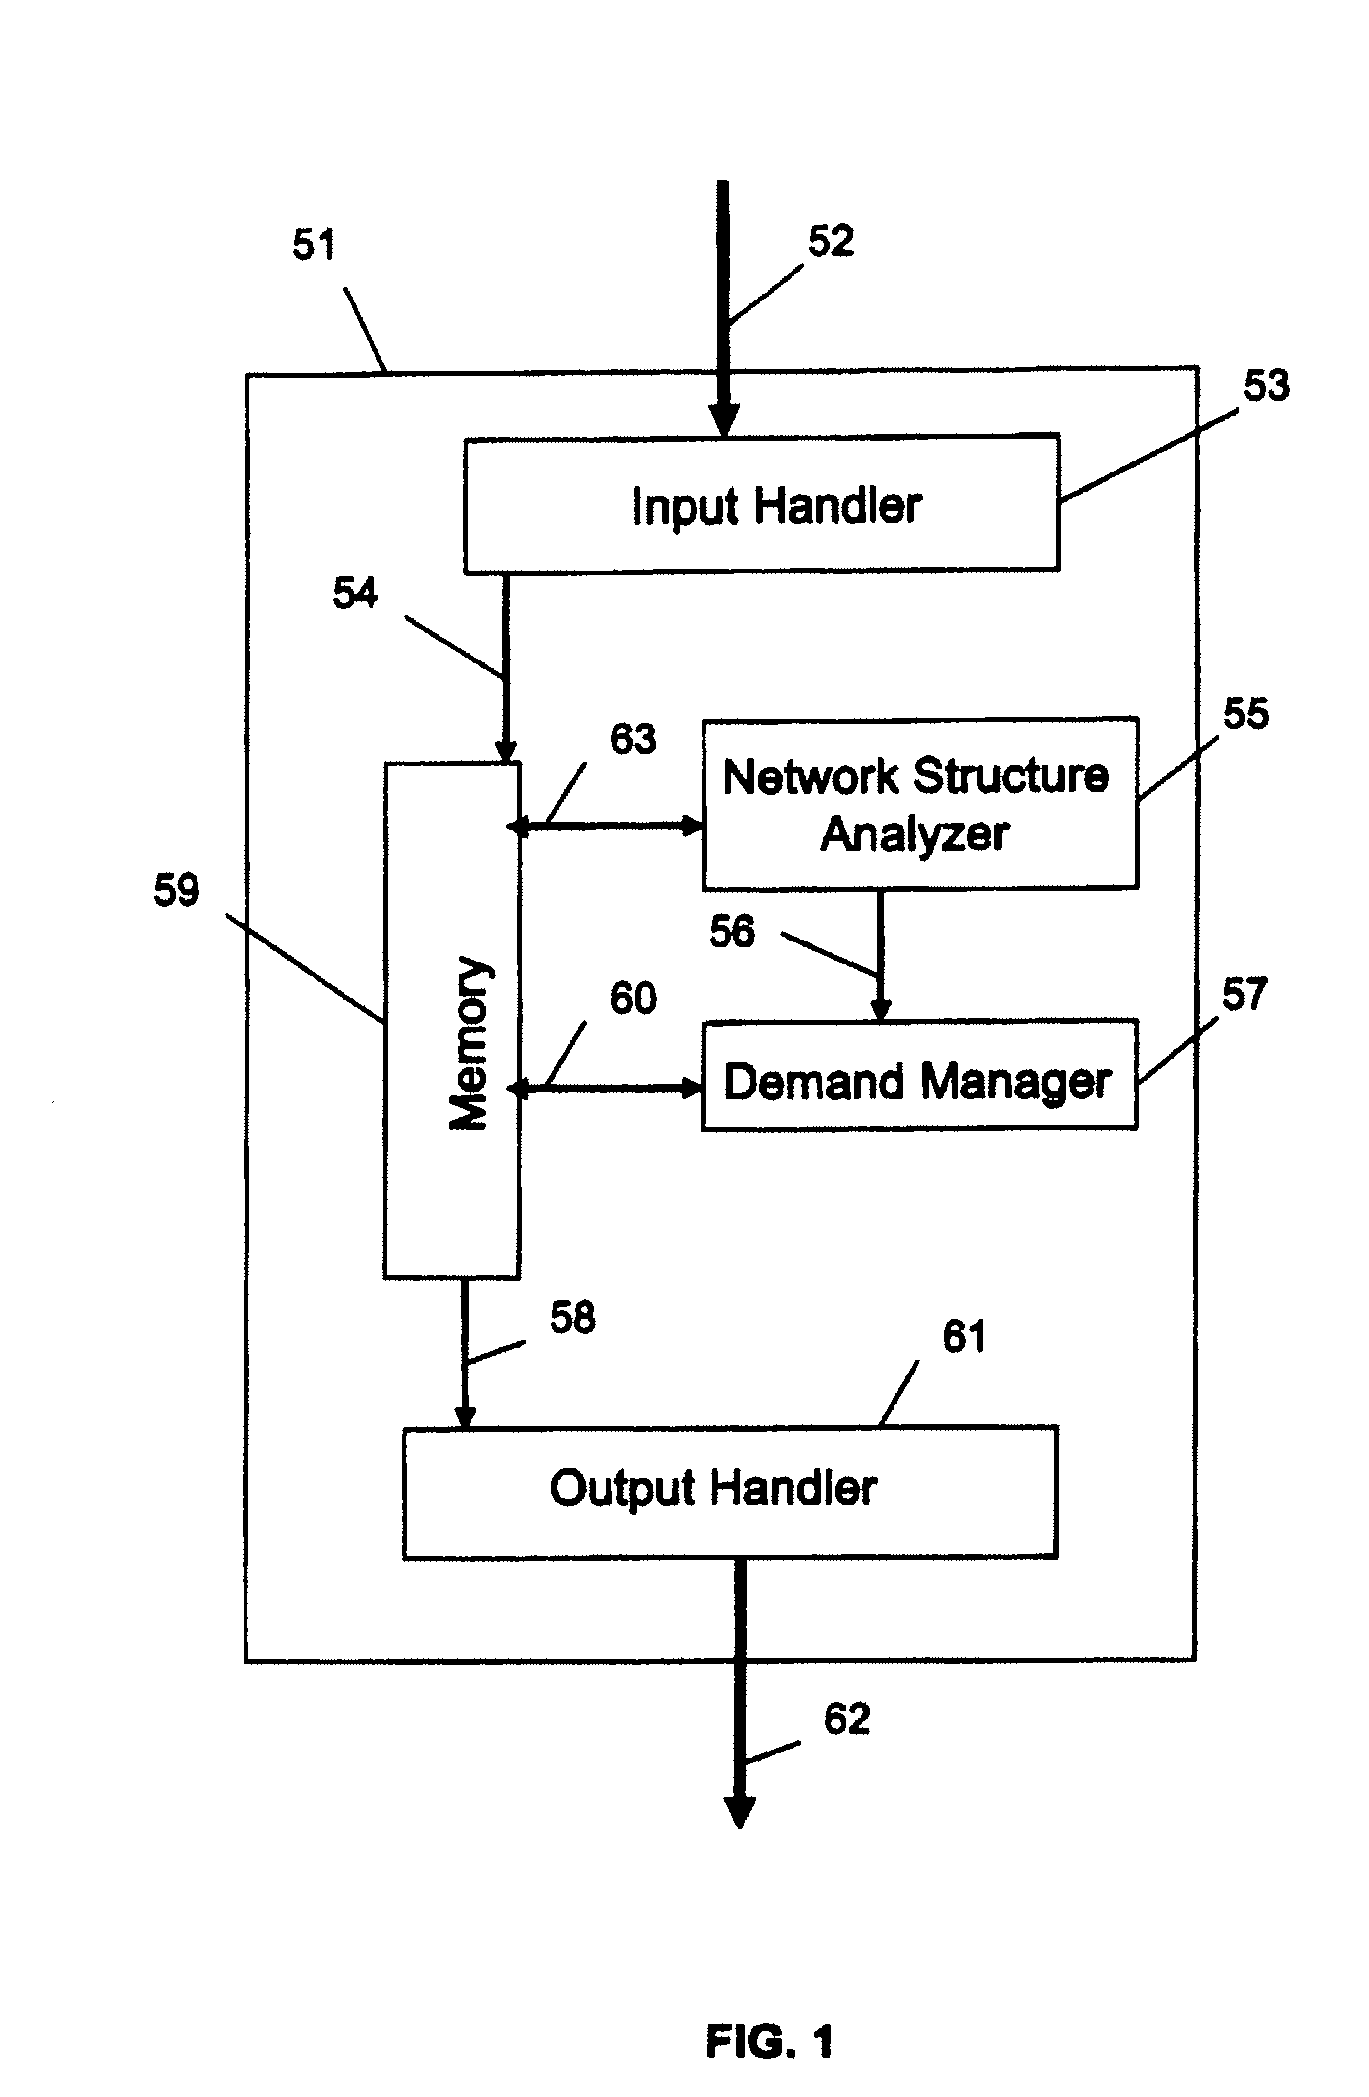 Method of Optimizing Routing of Demands in a Network